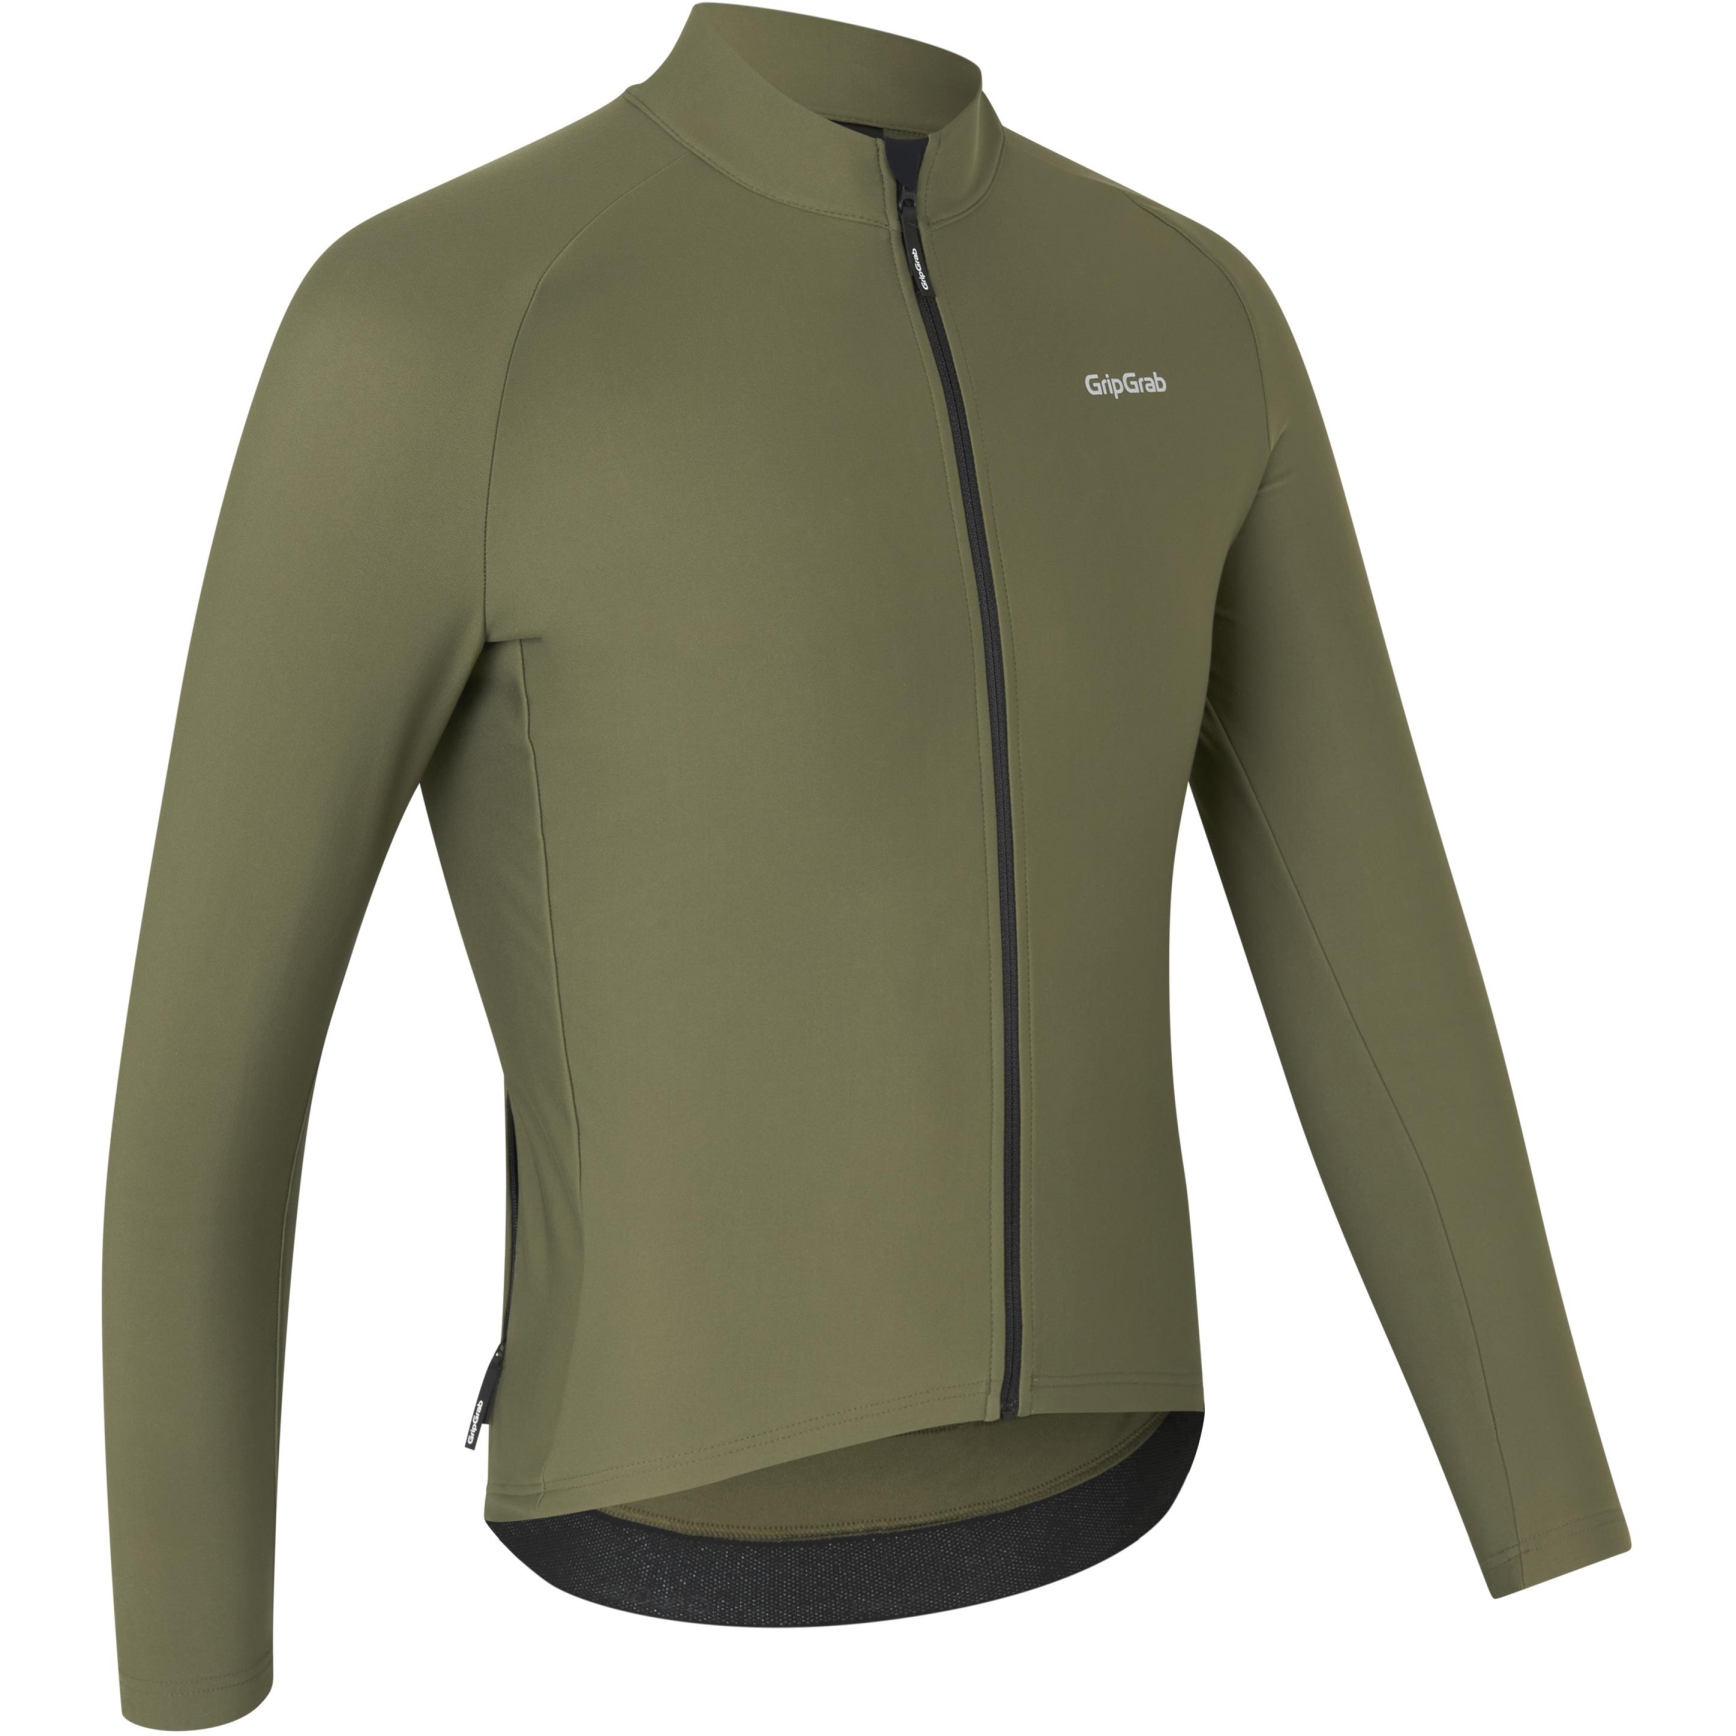 Picture of GripGrab ThermaPace Thermal Long Sleeve Jersey - olive green